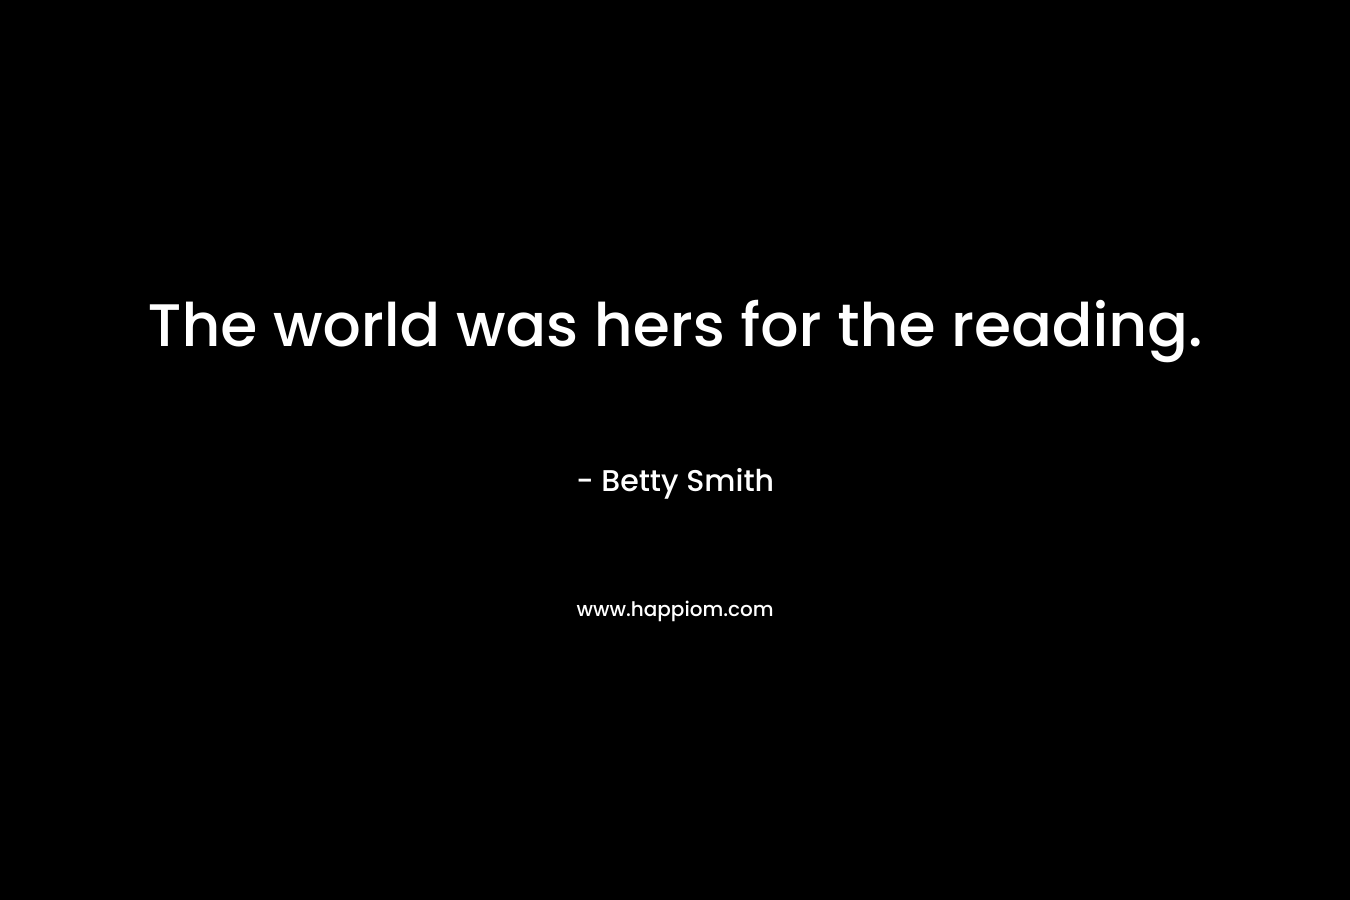 The world was hers for the reading.